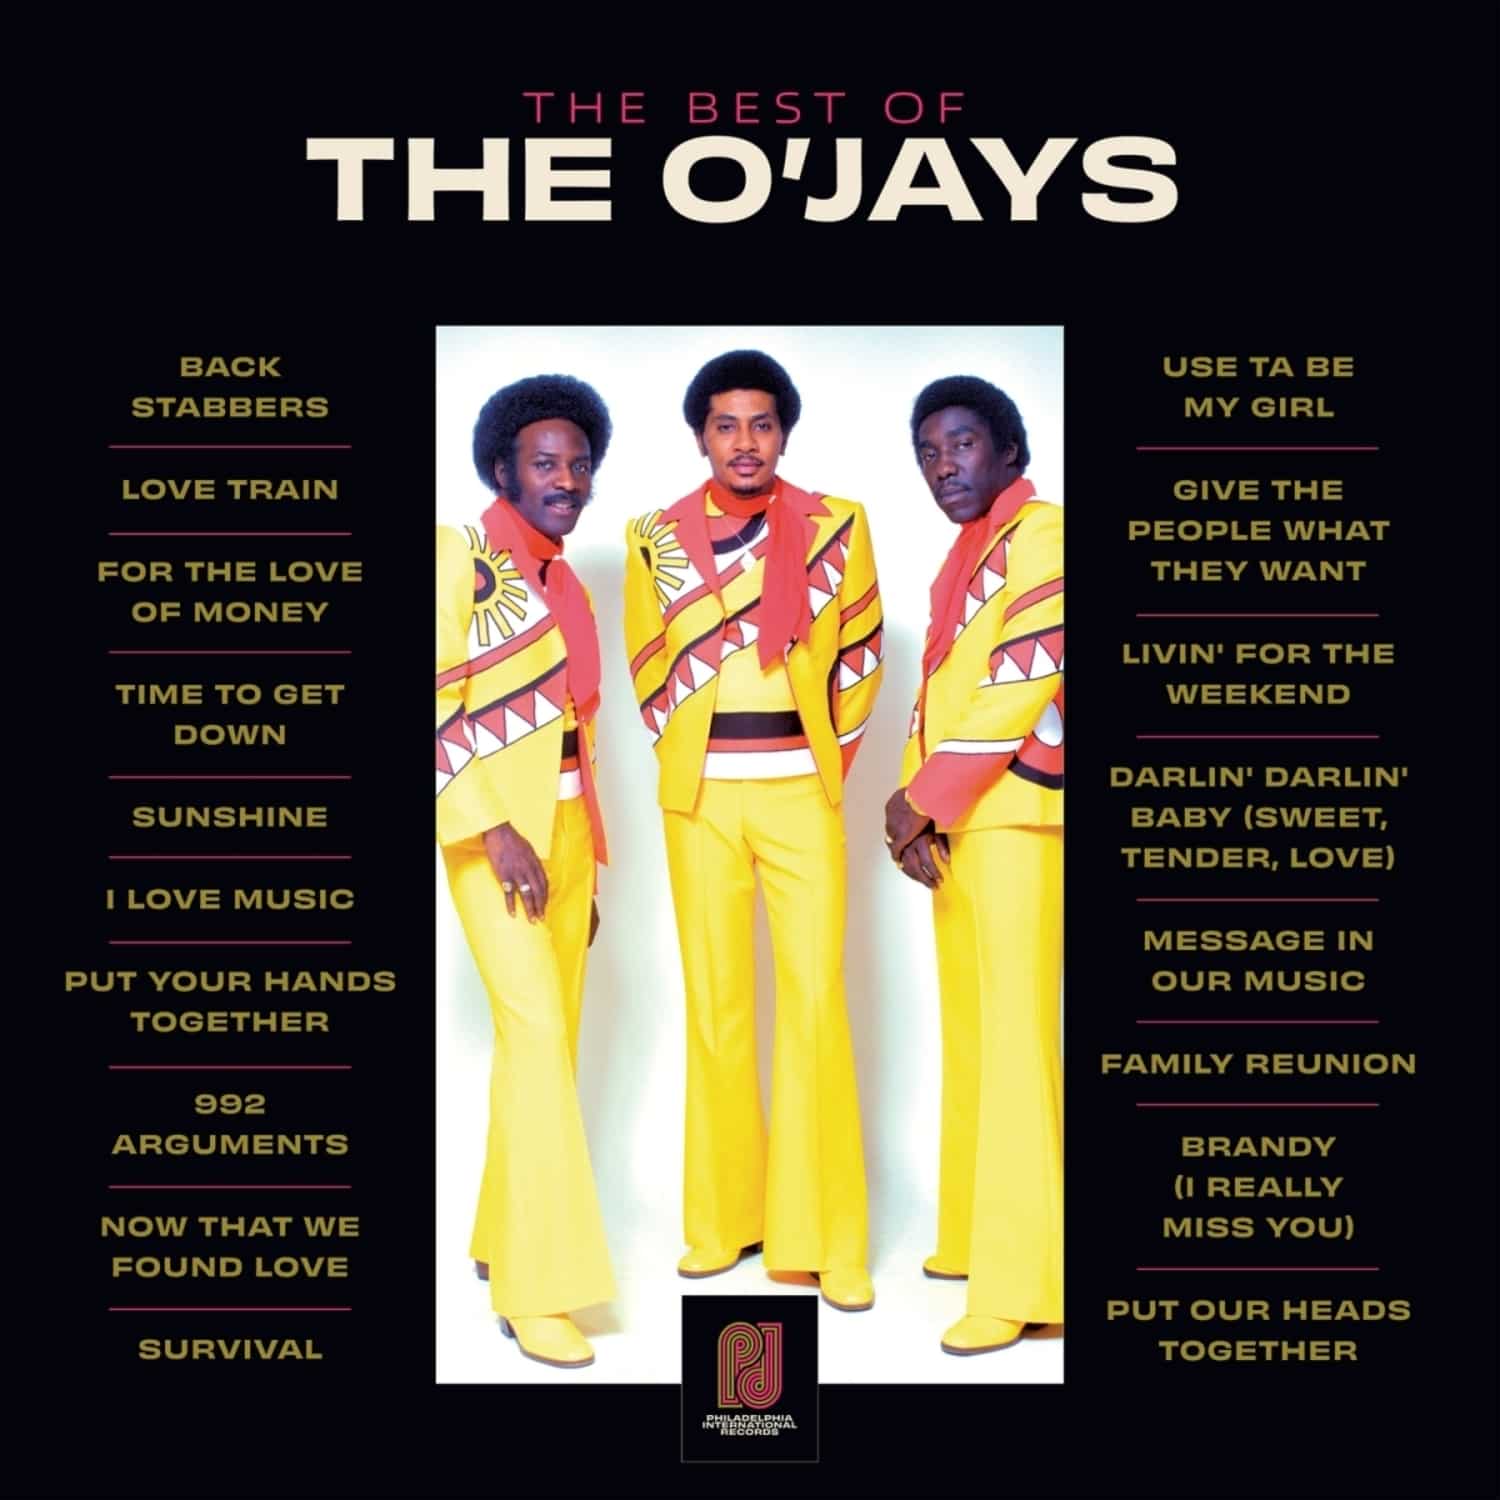 The O Jays - THE BEST OF THE O JAYS 